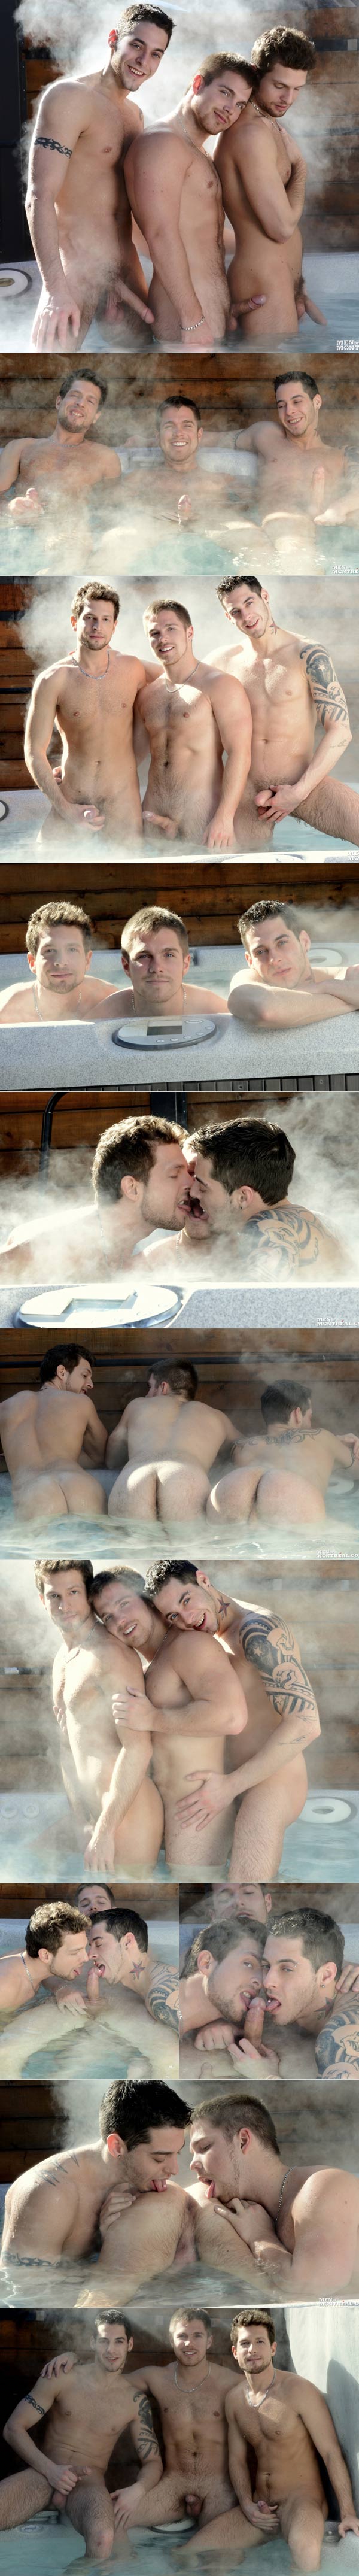 A Steaming Hot Winter Chill! (Ben Rose, Marko Lebeau & Hayden Colby) at MenOfMontreal